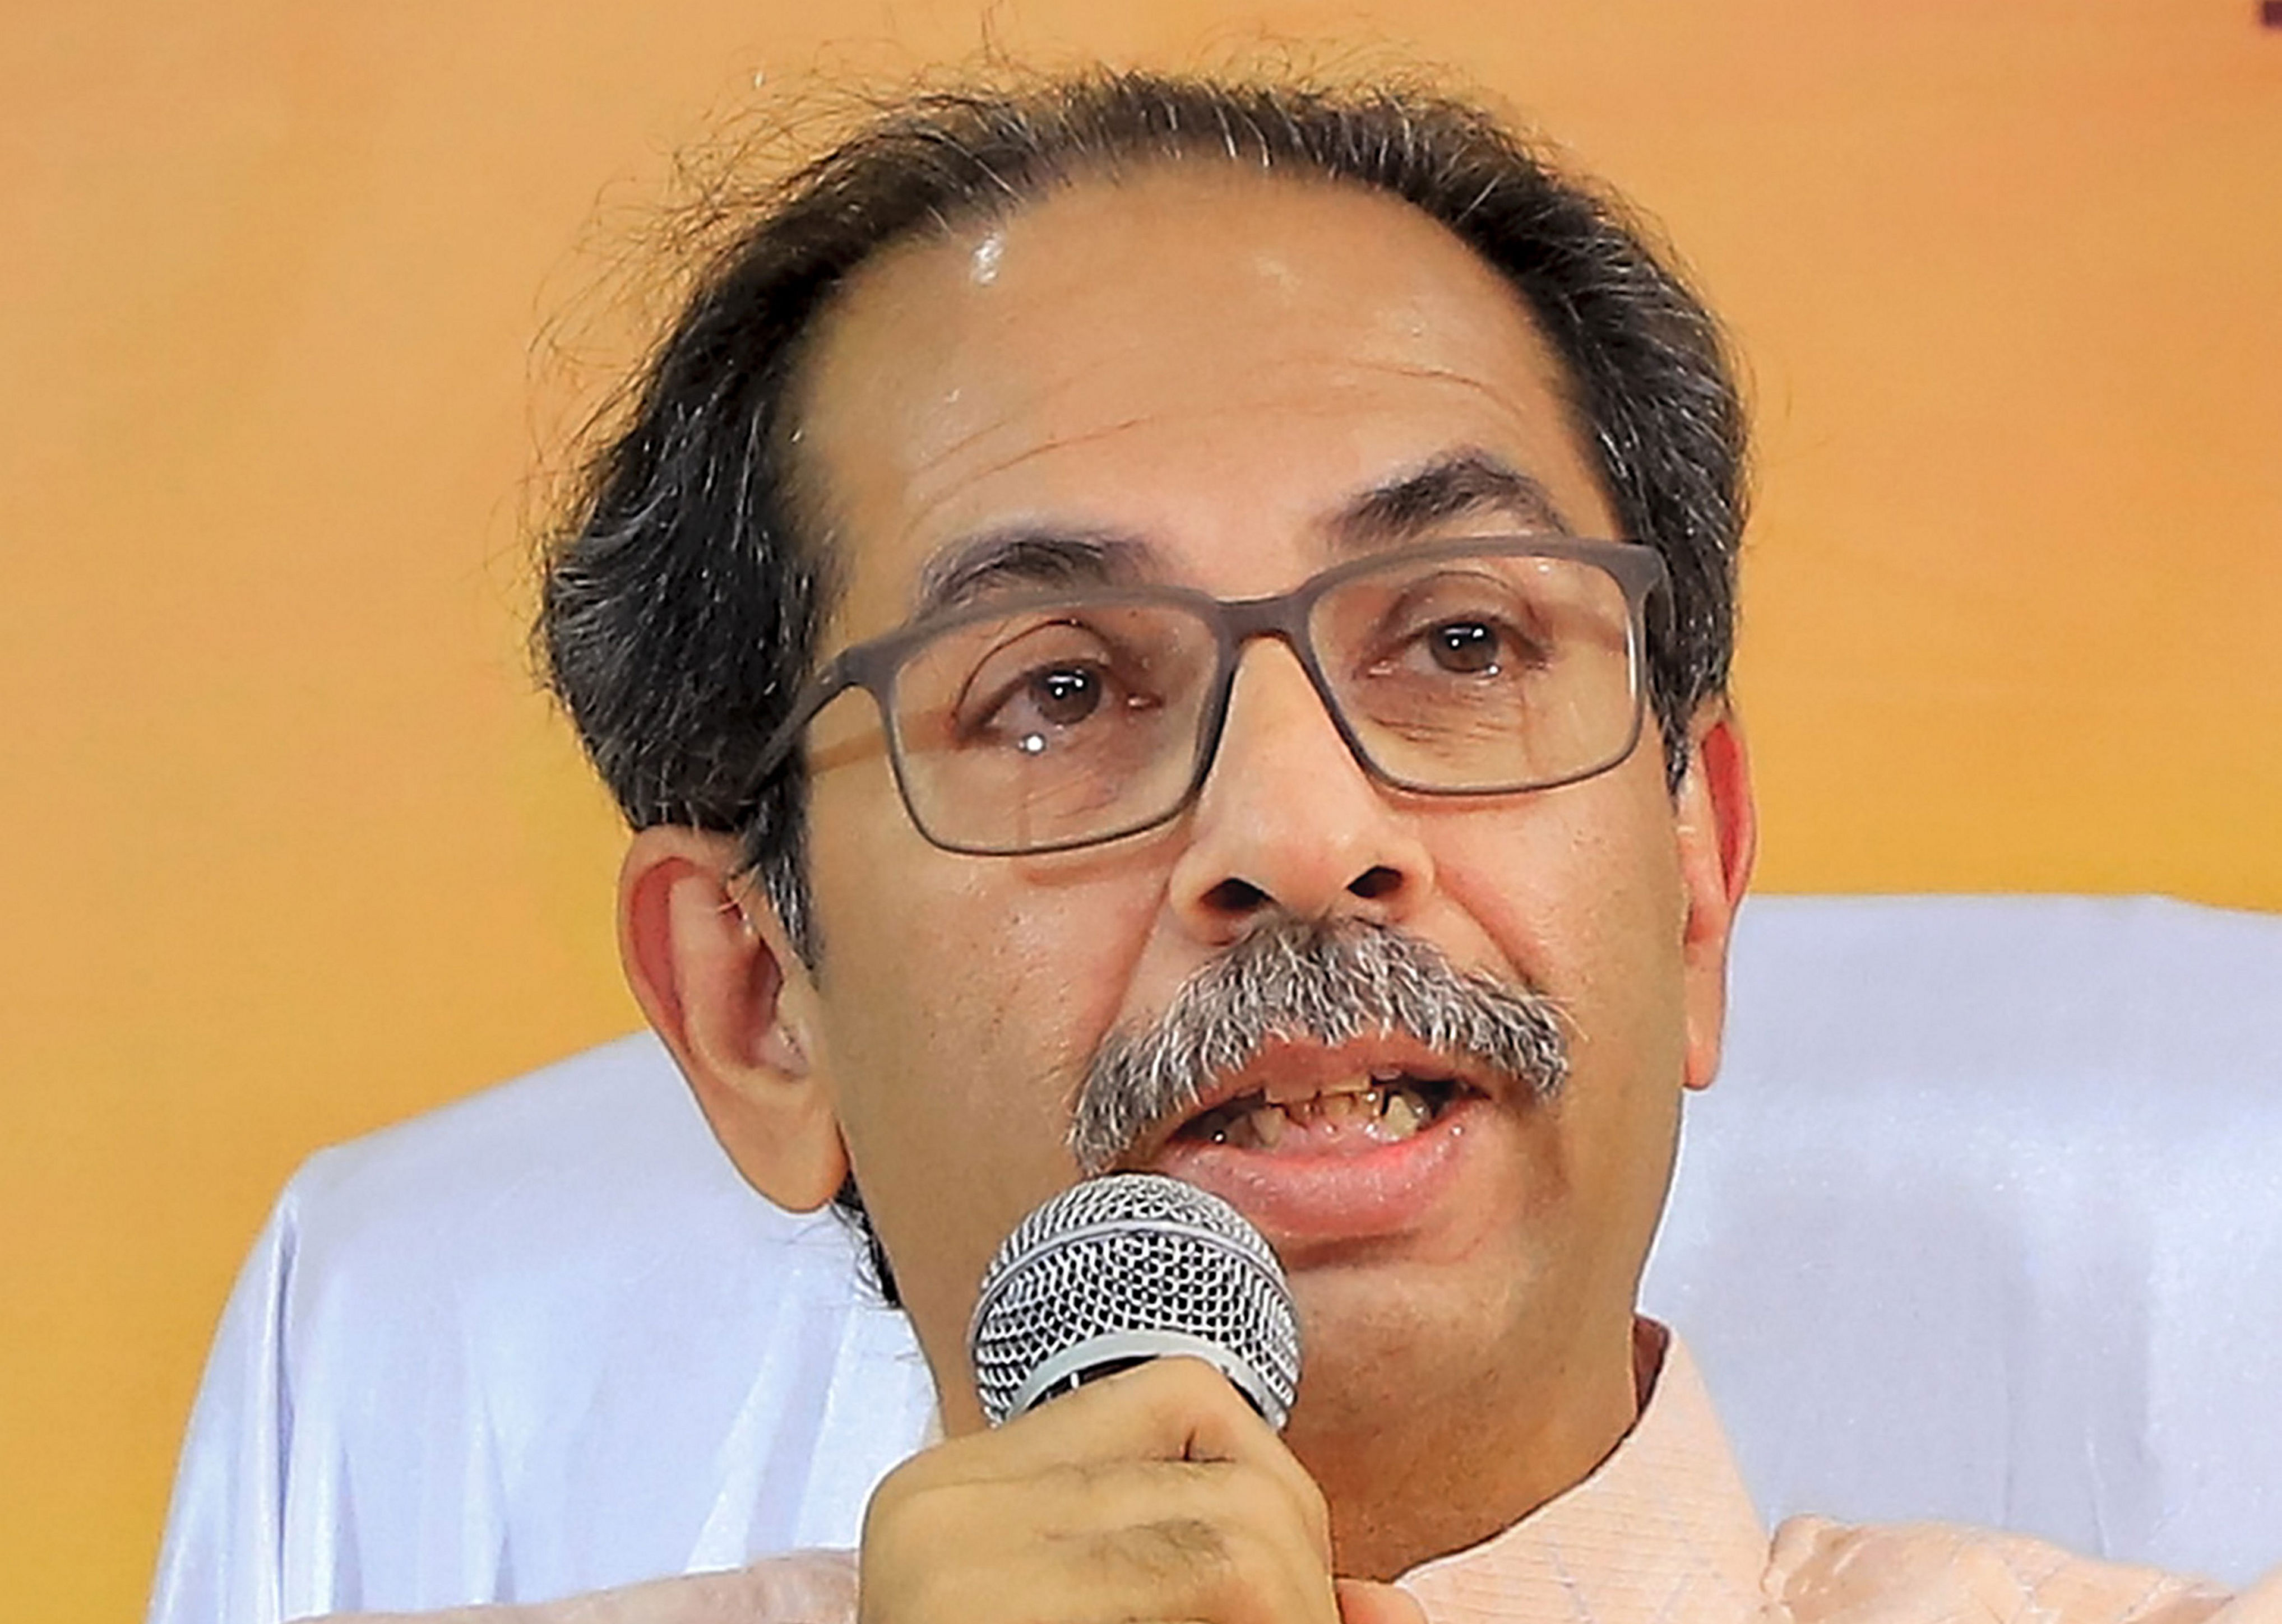 uddhav tries to soothe frayed nerves as cong fumes over raut's remarks on lok sabha seats